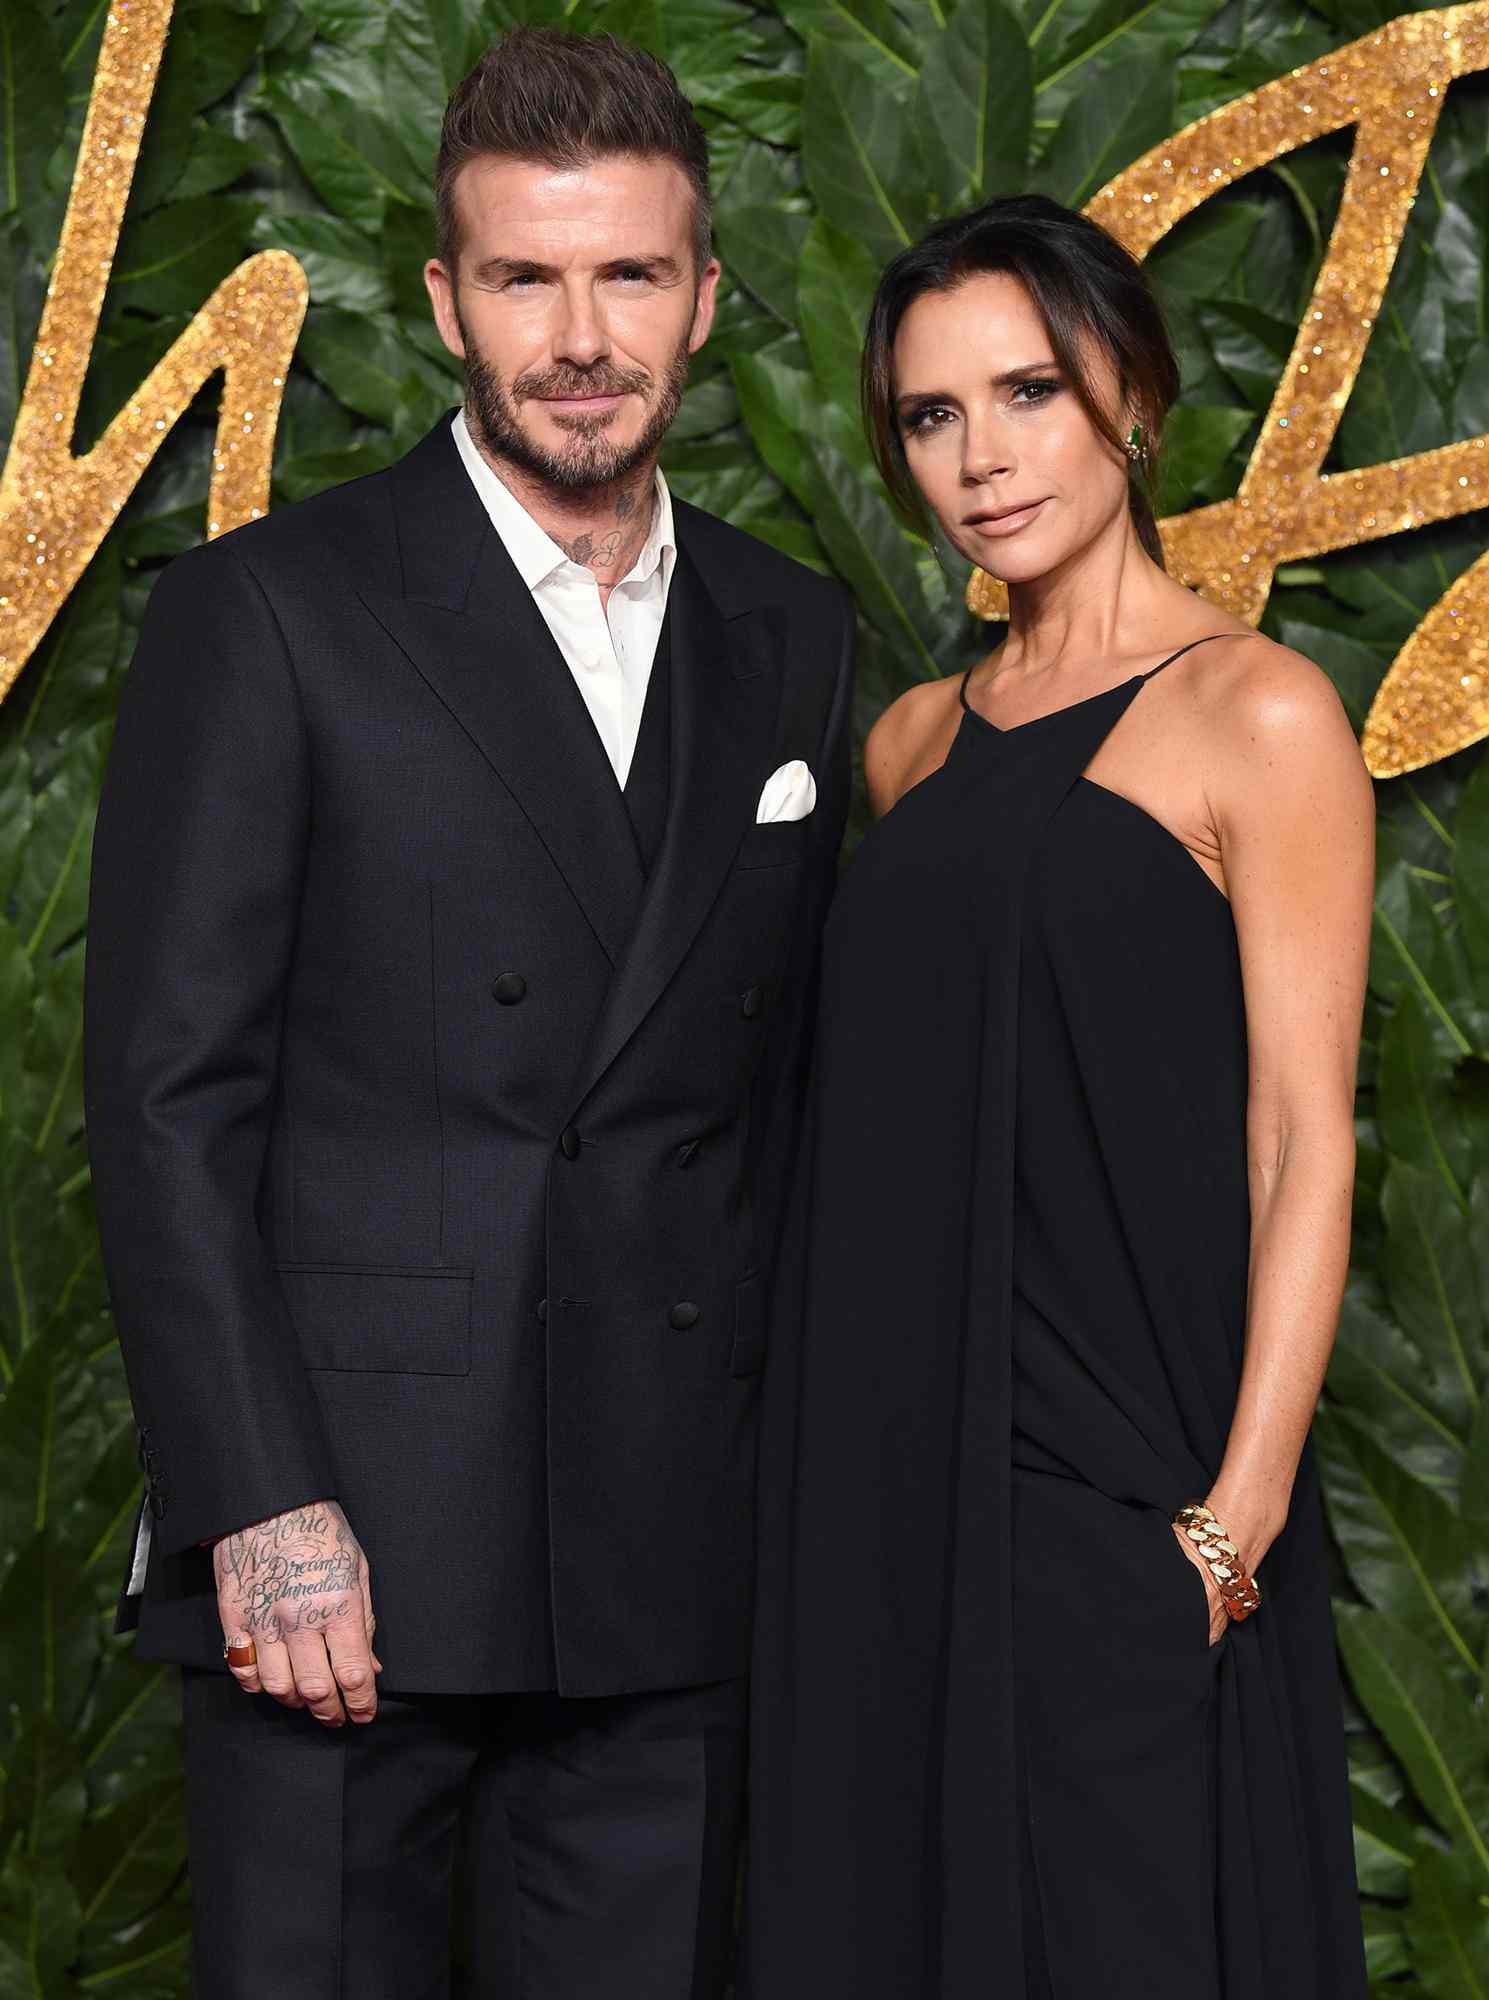 David Beckham and Victoria Beckham arrive at The Fashion Awards 2018 In Partnership With Swarovski at Royal Albert Hall on December 10, 2018 in London, England